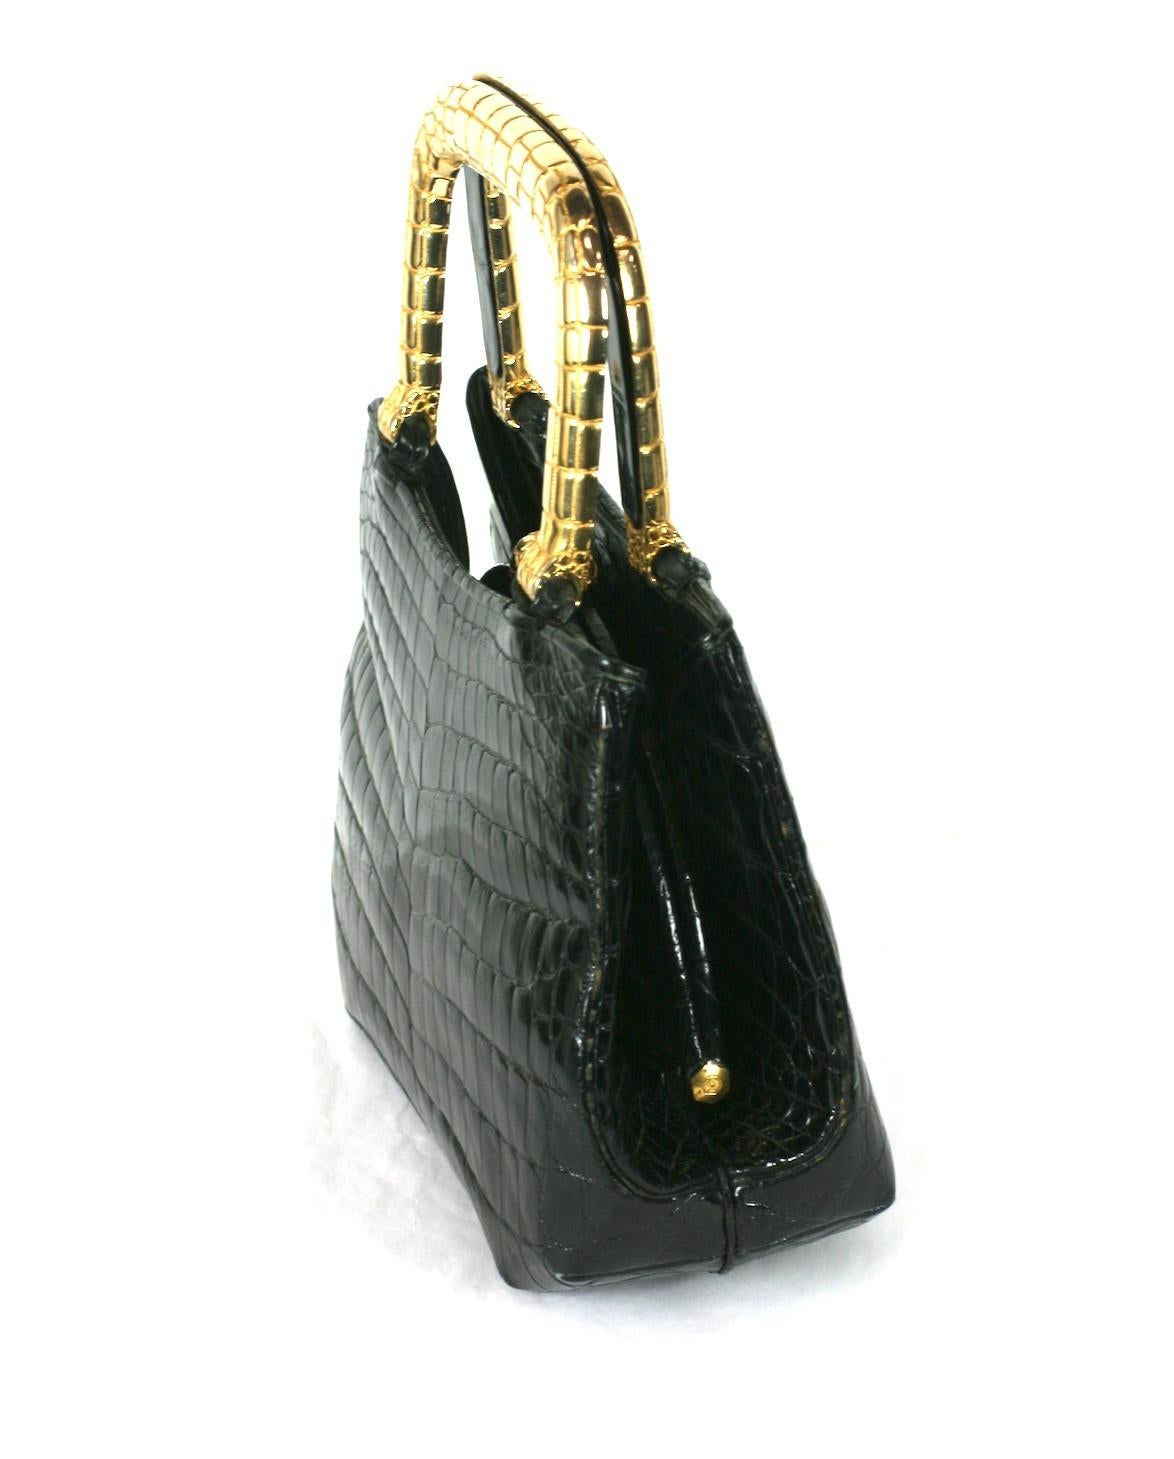 Chic and charming Judith Leiber Alligator Bag with Gilt Handles. High quality center cut black skin with gilded handles embossed with a crocodile pattern.  1980's USA-Italy. 1970's.
Gilt embossed 